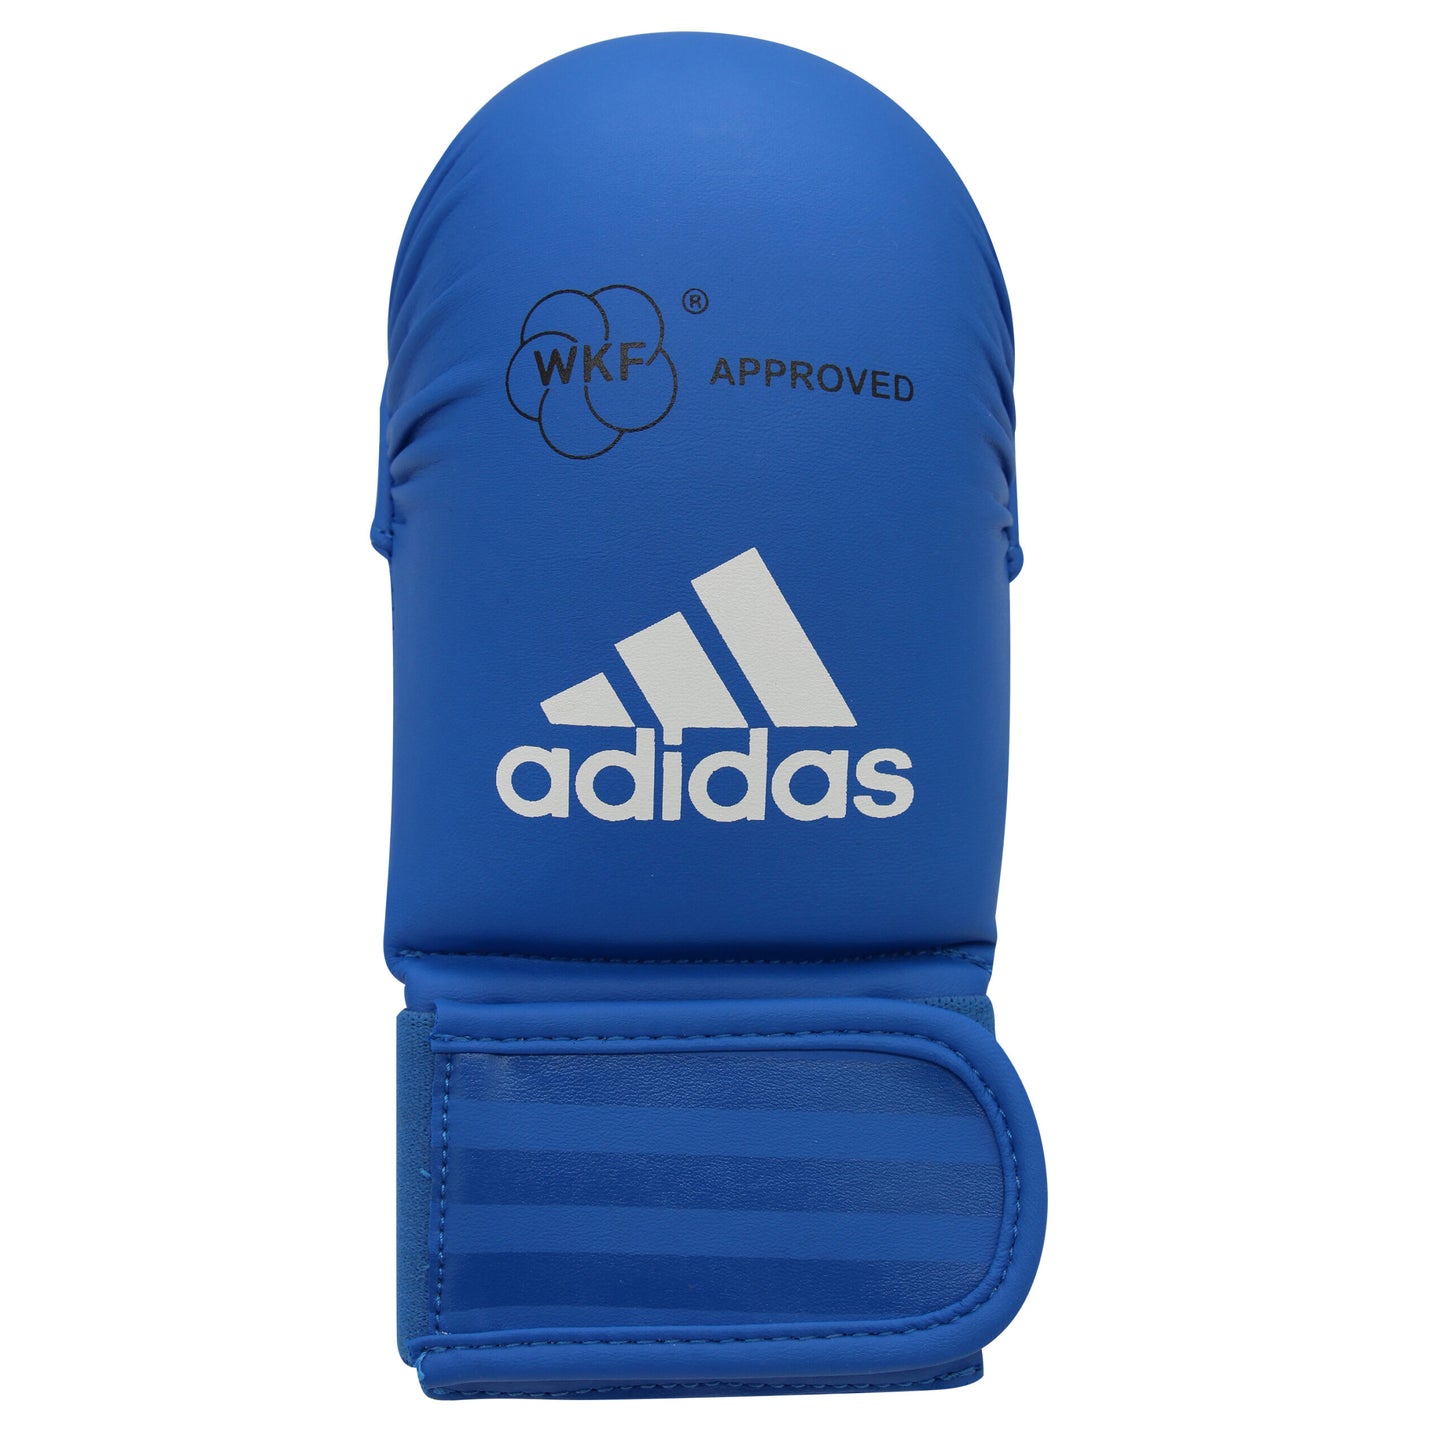 Adidas Wkf Approved Karate Mitts Blue 02